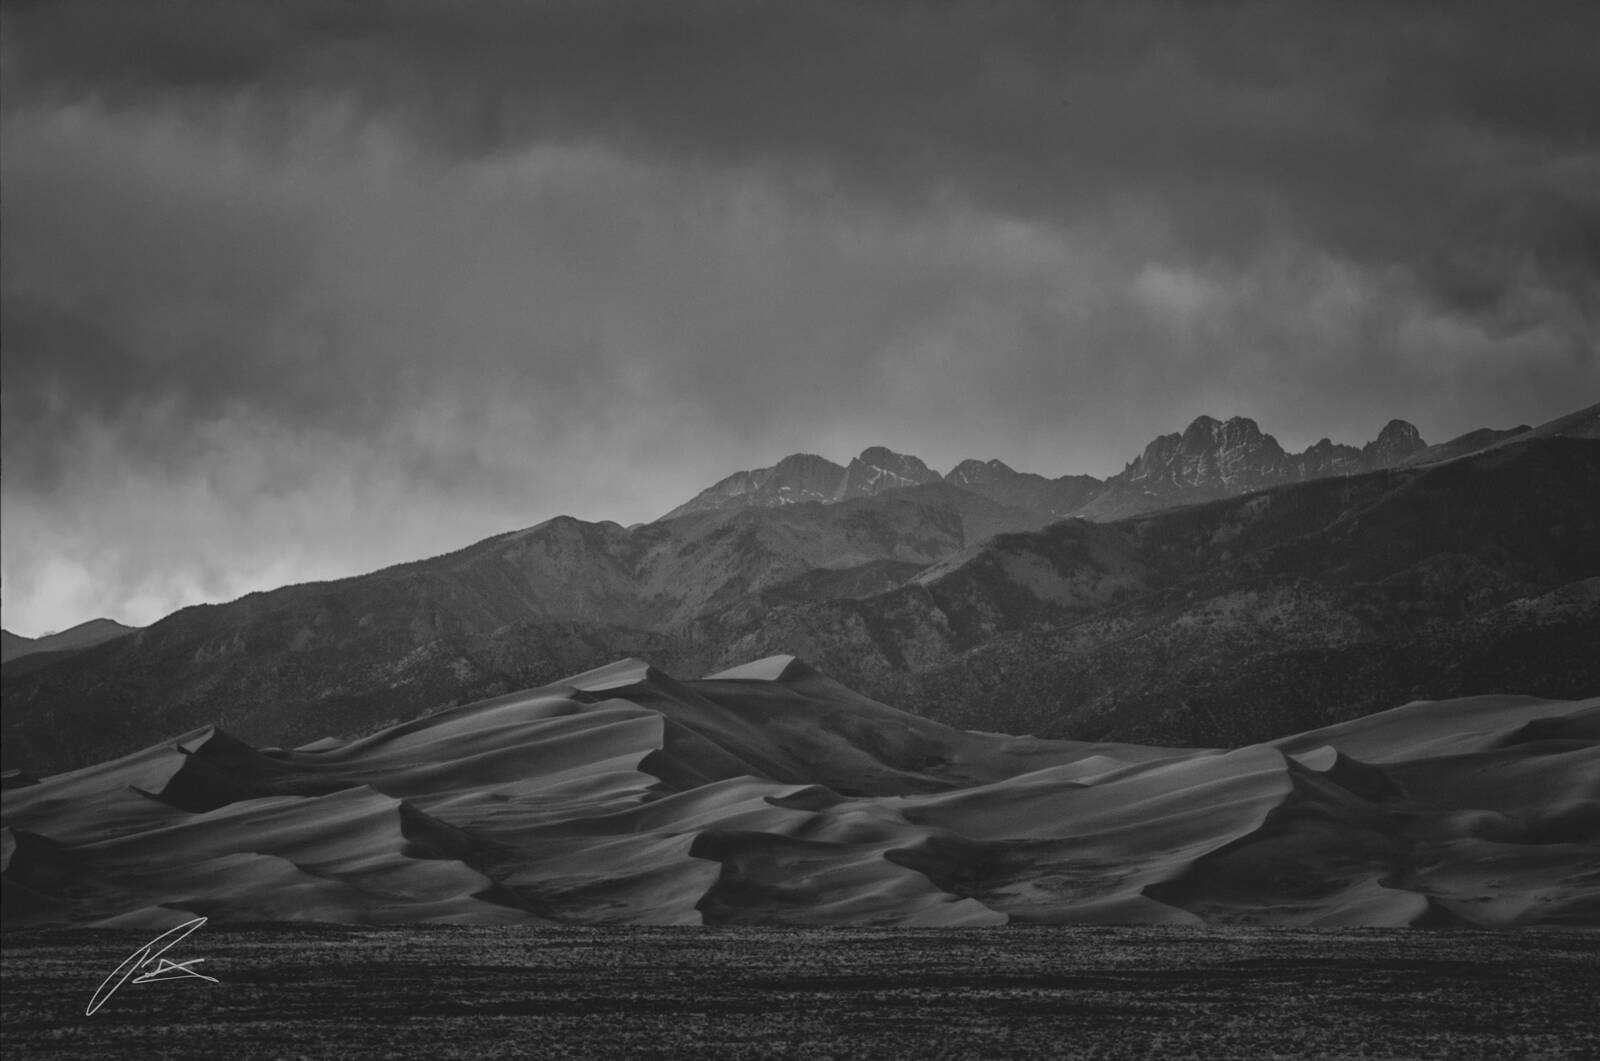 Image of Great Sand Dunes Sunset Mountain View C0-150 by Patrick Hulley